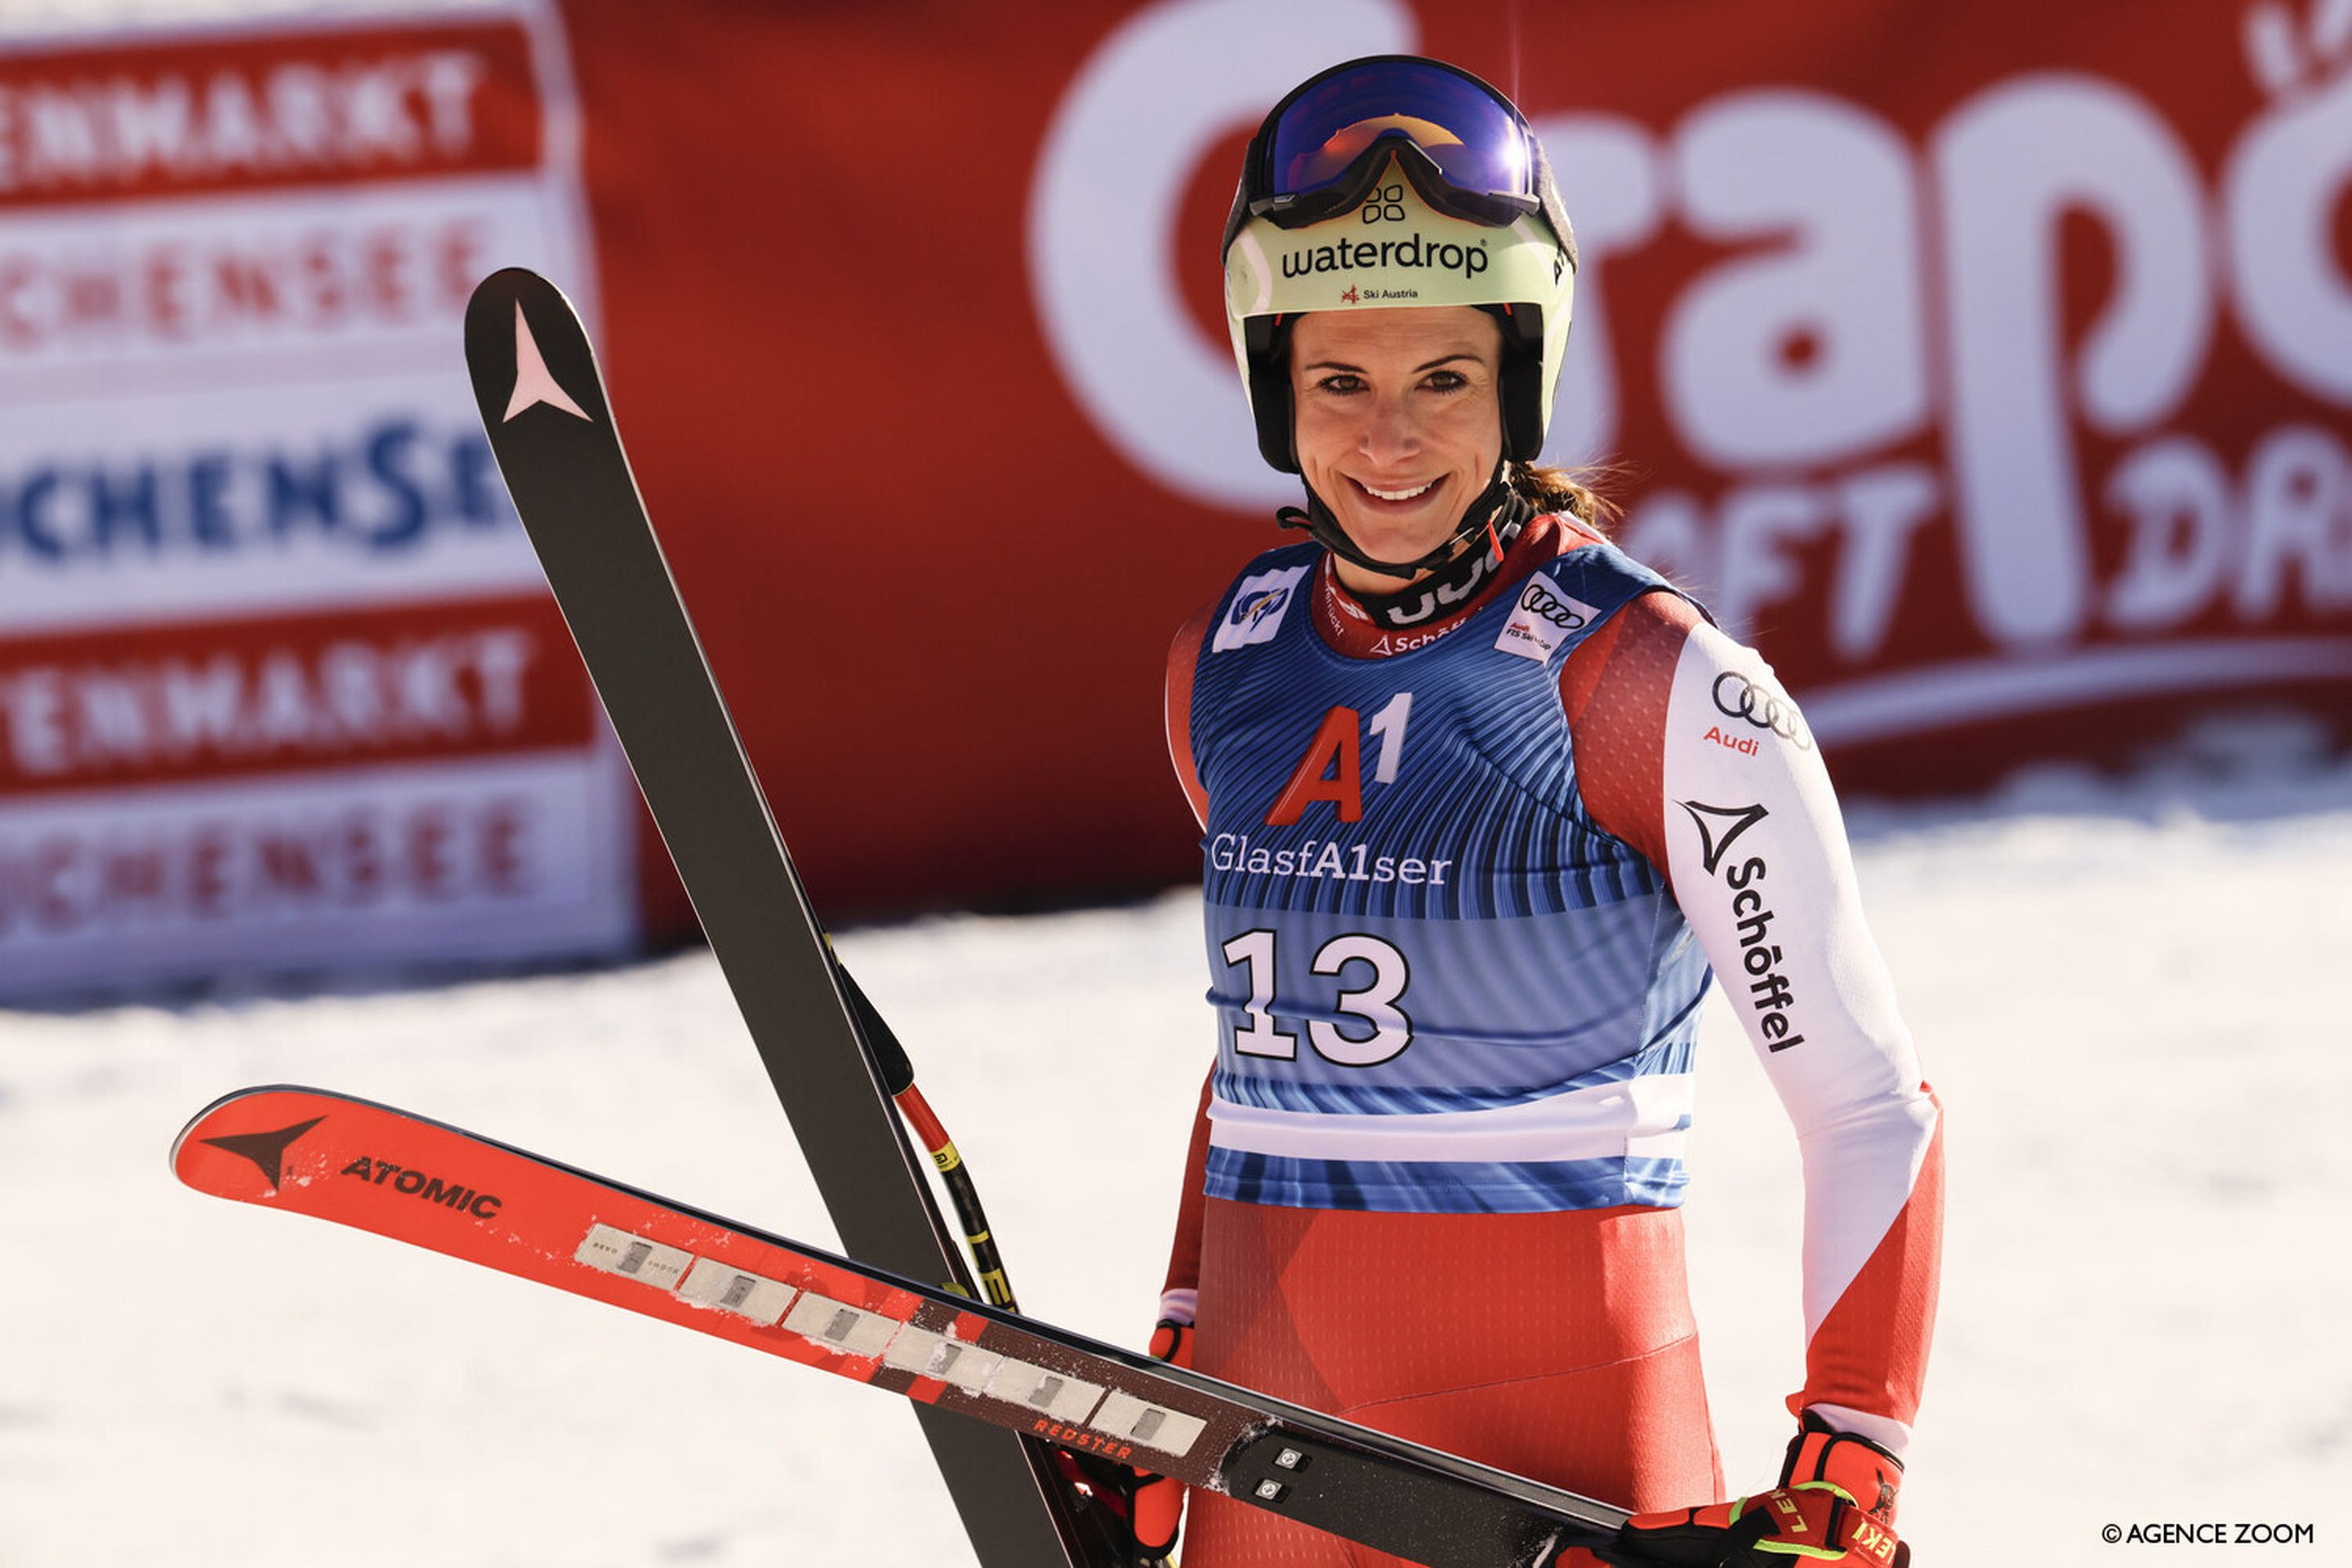 Mirjam Puchner (AUT) after skiing onto the podium on Saturday (Agence Zoom)